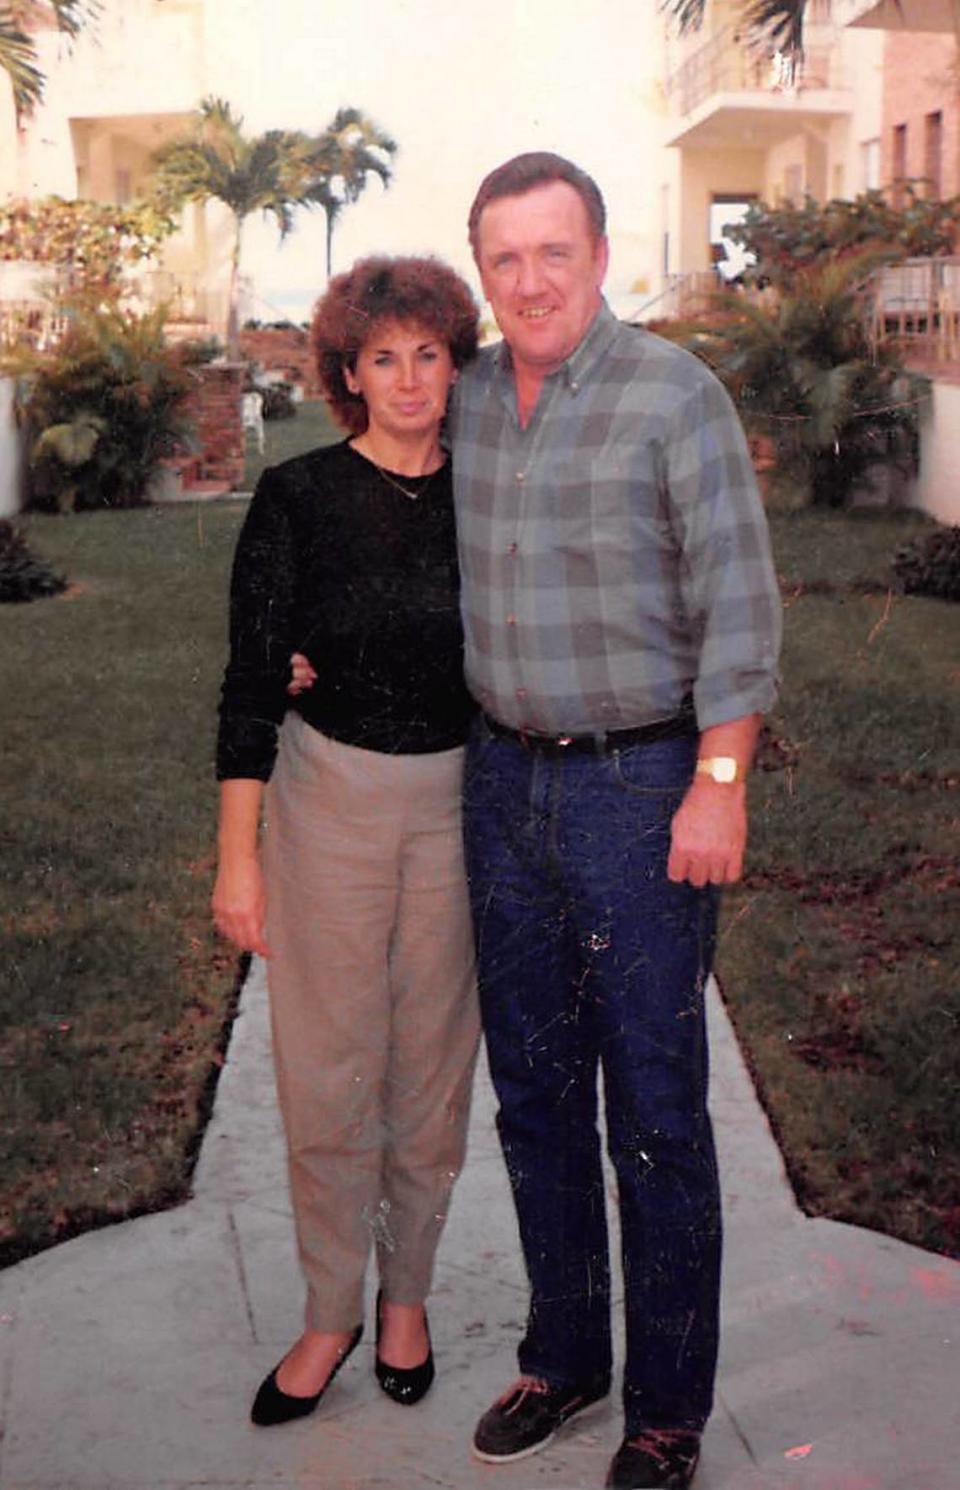 James “Jim” McHugh and Diane Snyder in undated photo. McHugh died in 2009 from COPD.